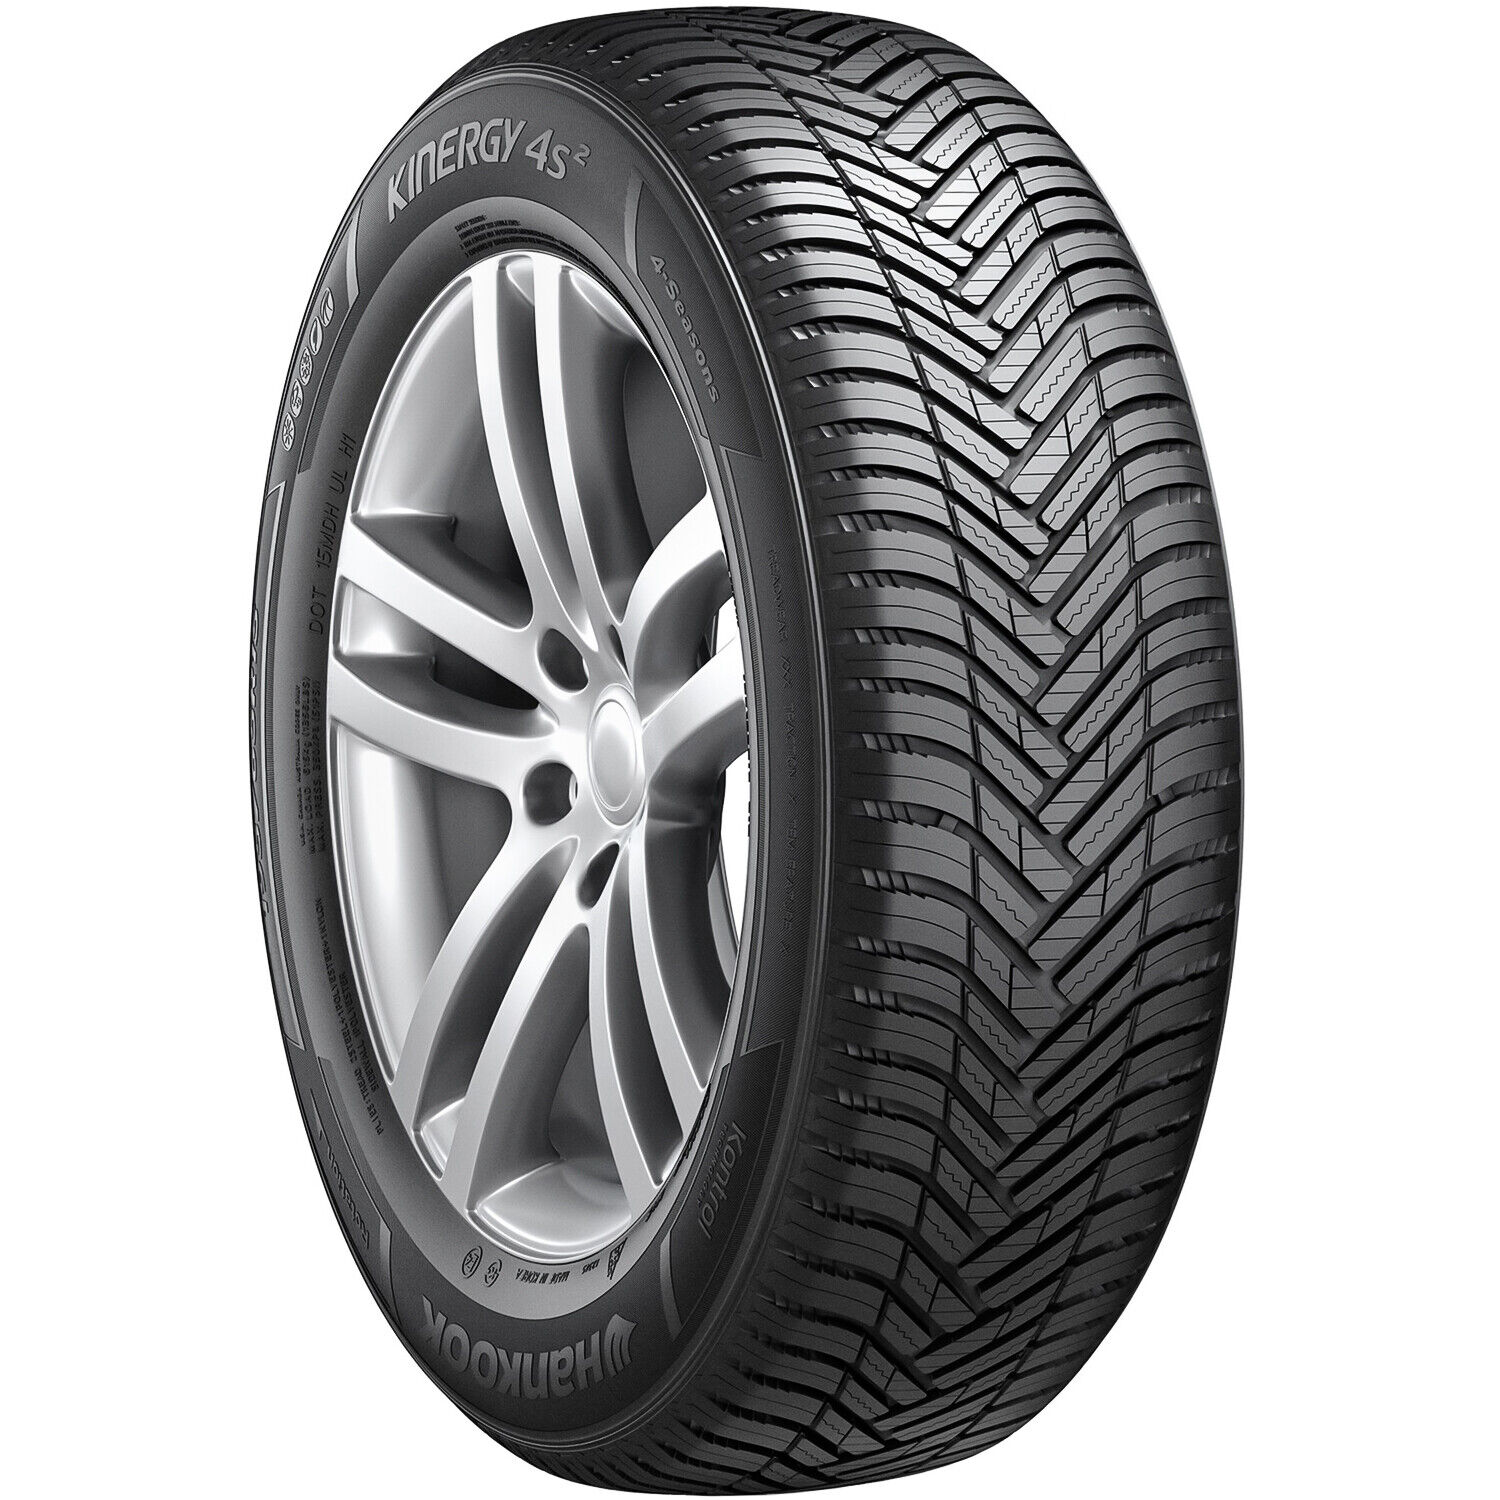 2 Tires Hankook Kinergy 4S2 215/55R17 94V All Weather